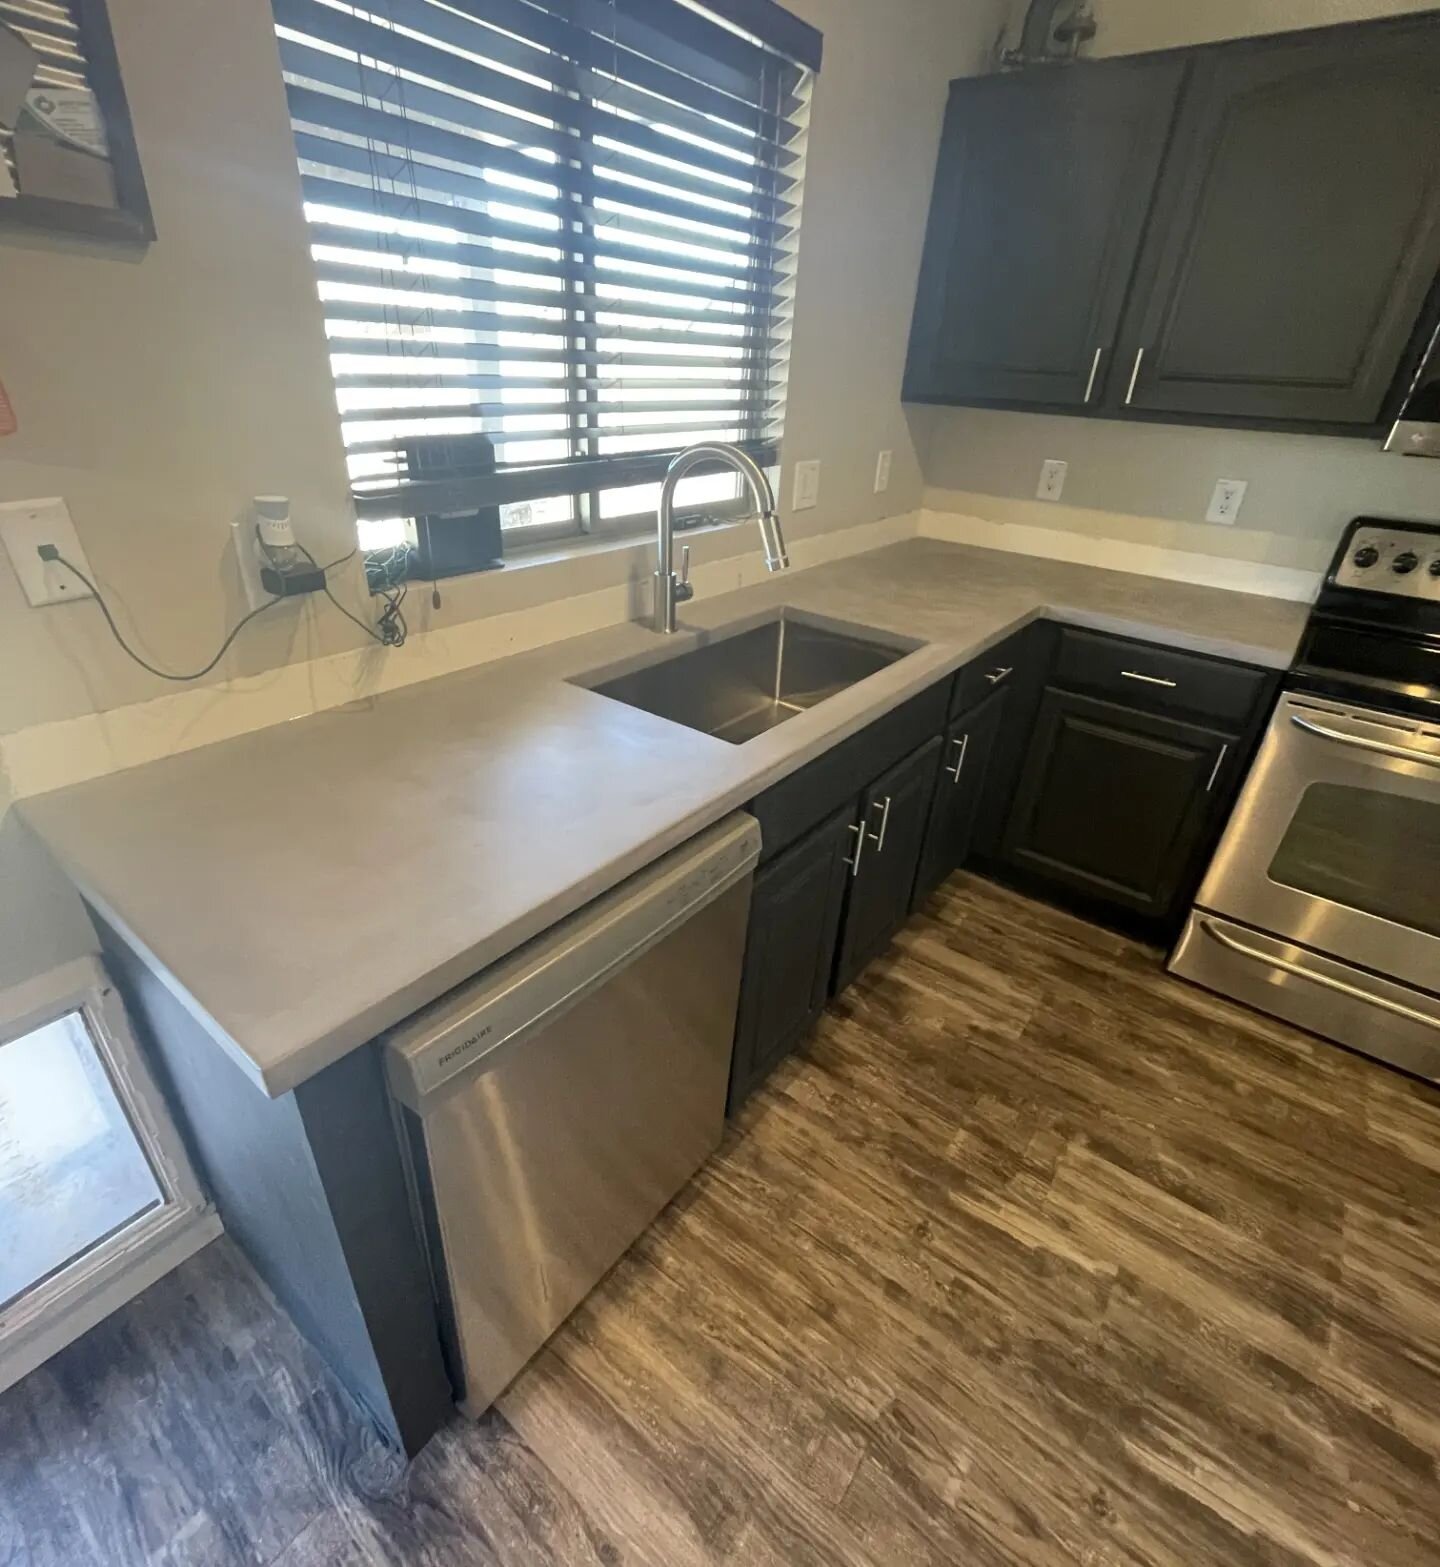 Behind the scenes after this kitchen installation! These top designs have  great moment and the client loved it!

#concretecountertops #concretefurniture #interiordesign #customcounters #phoenix #arizona #freedomconcrete #noseams #concretekitchen #re